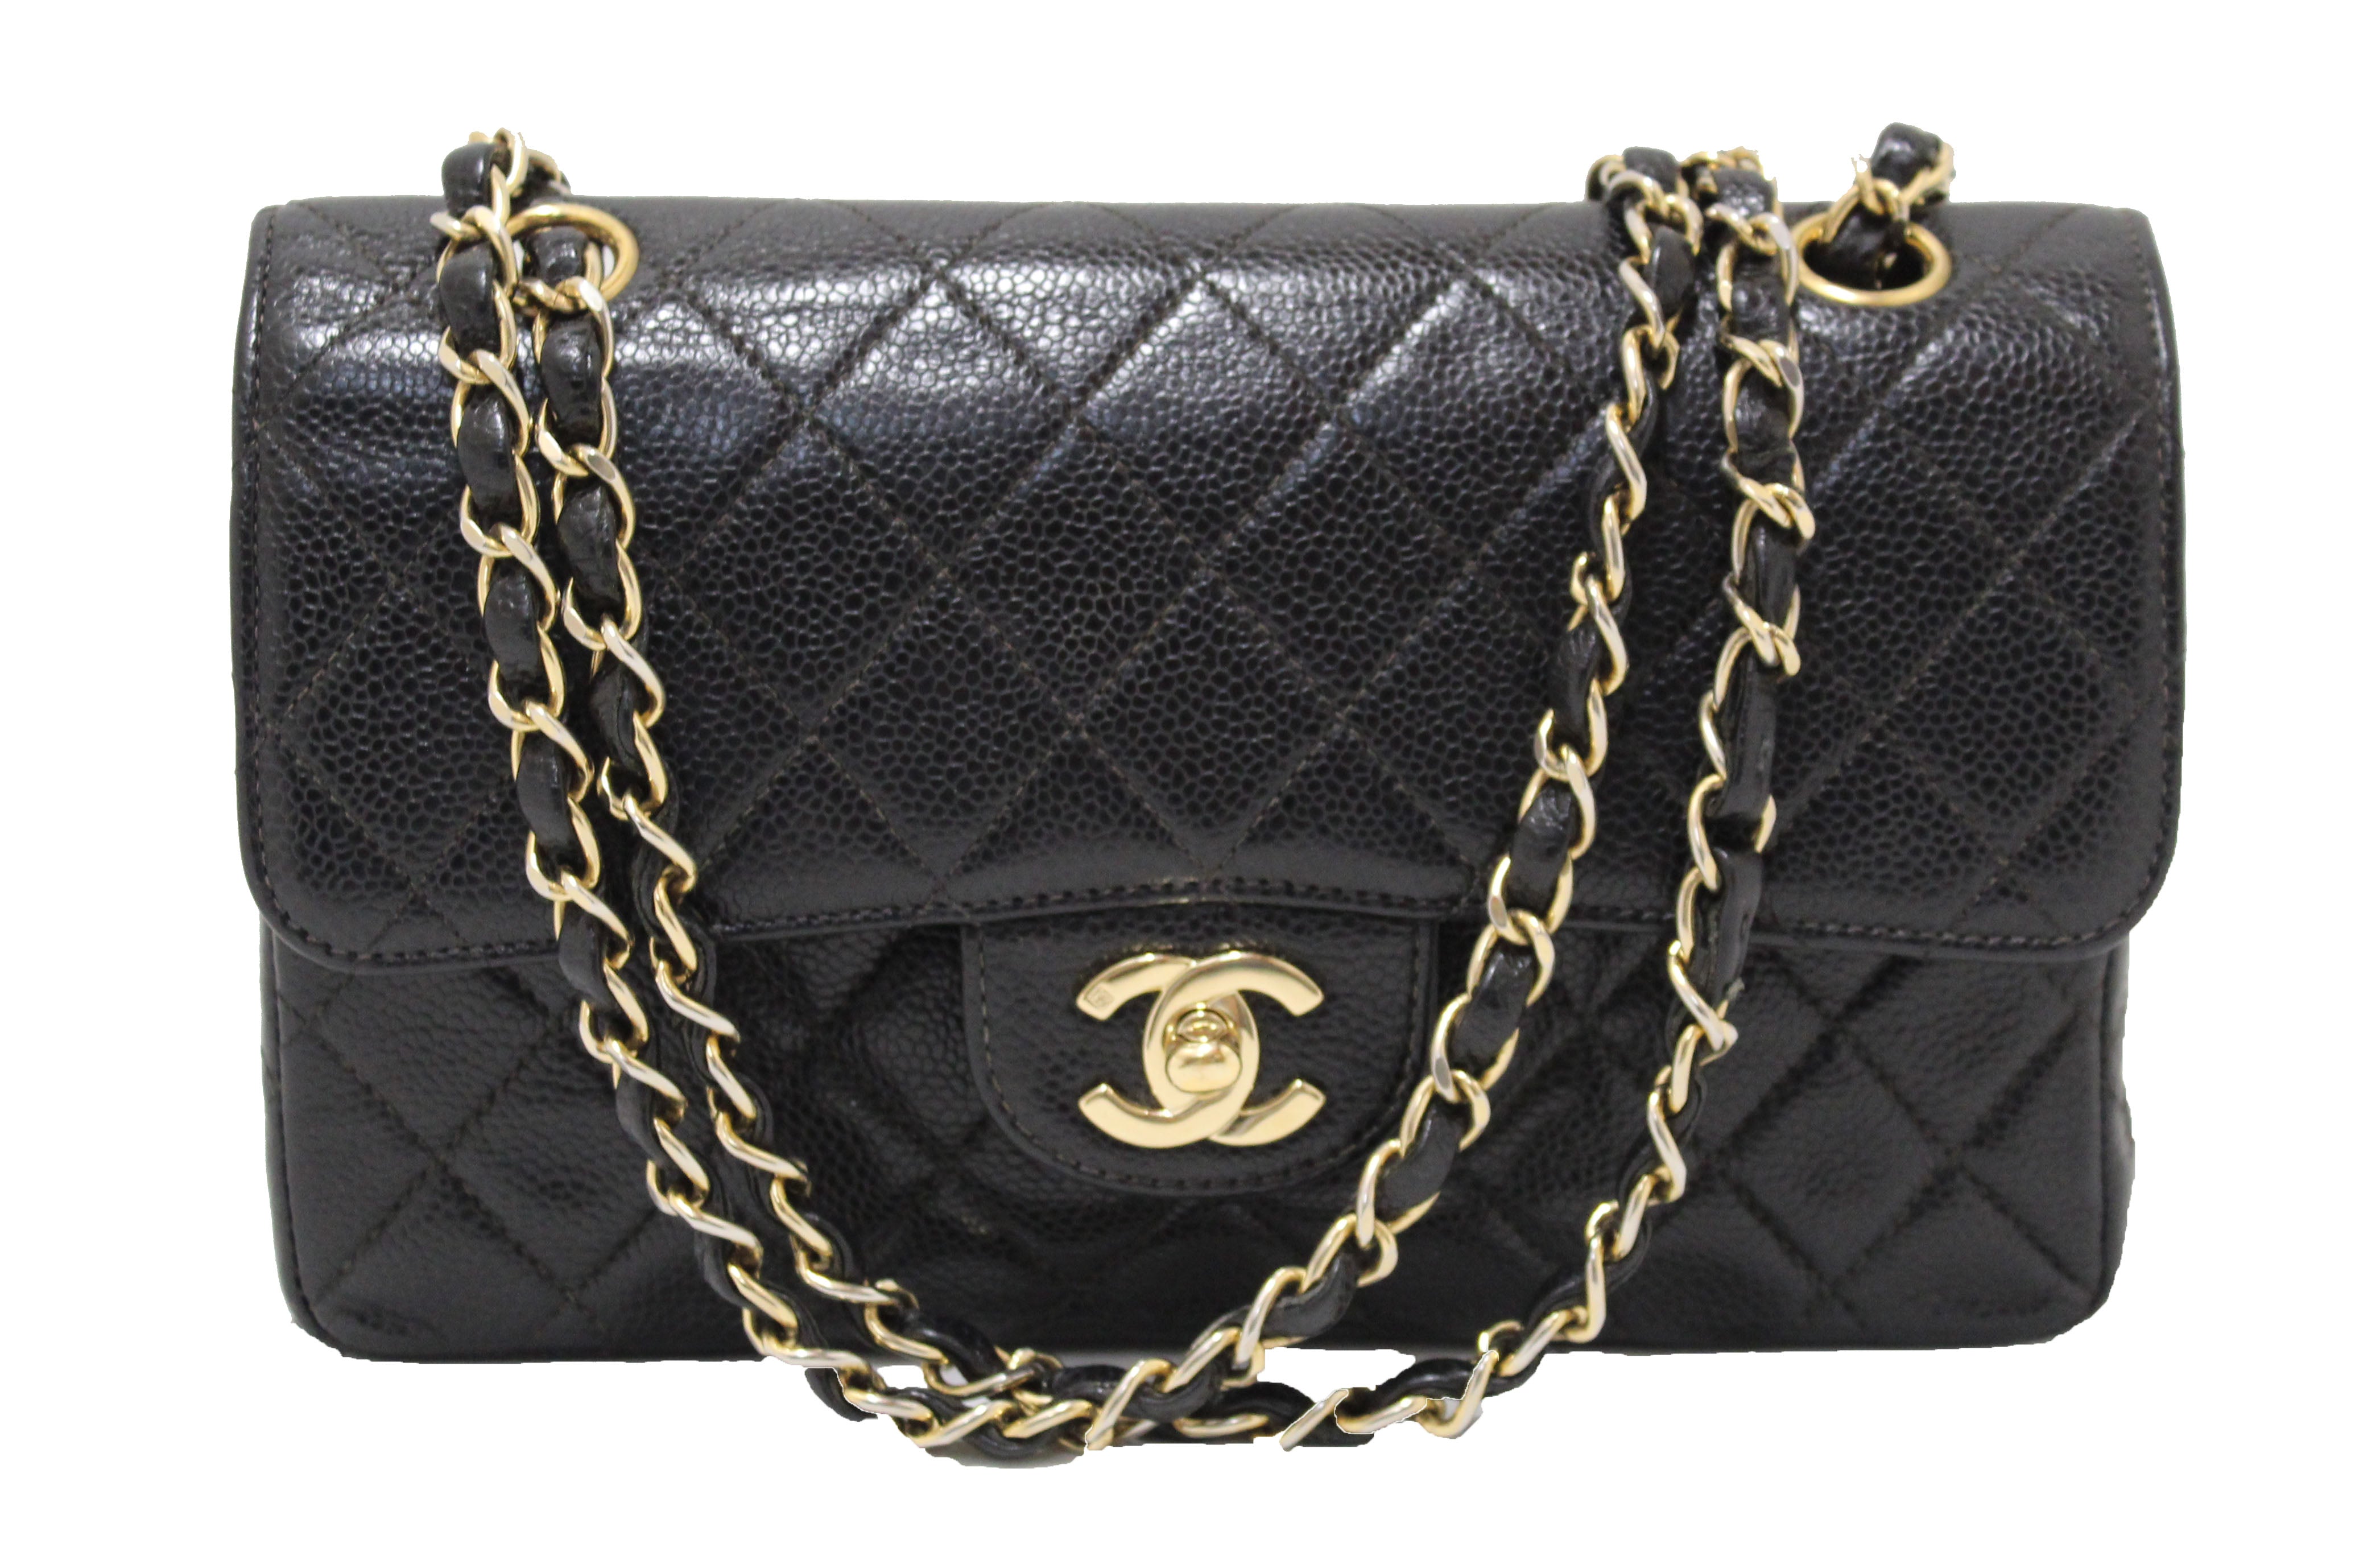 Chanel Leather Grained Calfskin Large Classic Double Flap Shoulder